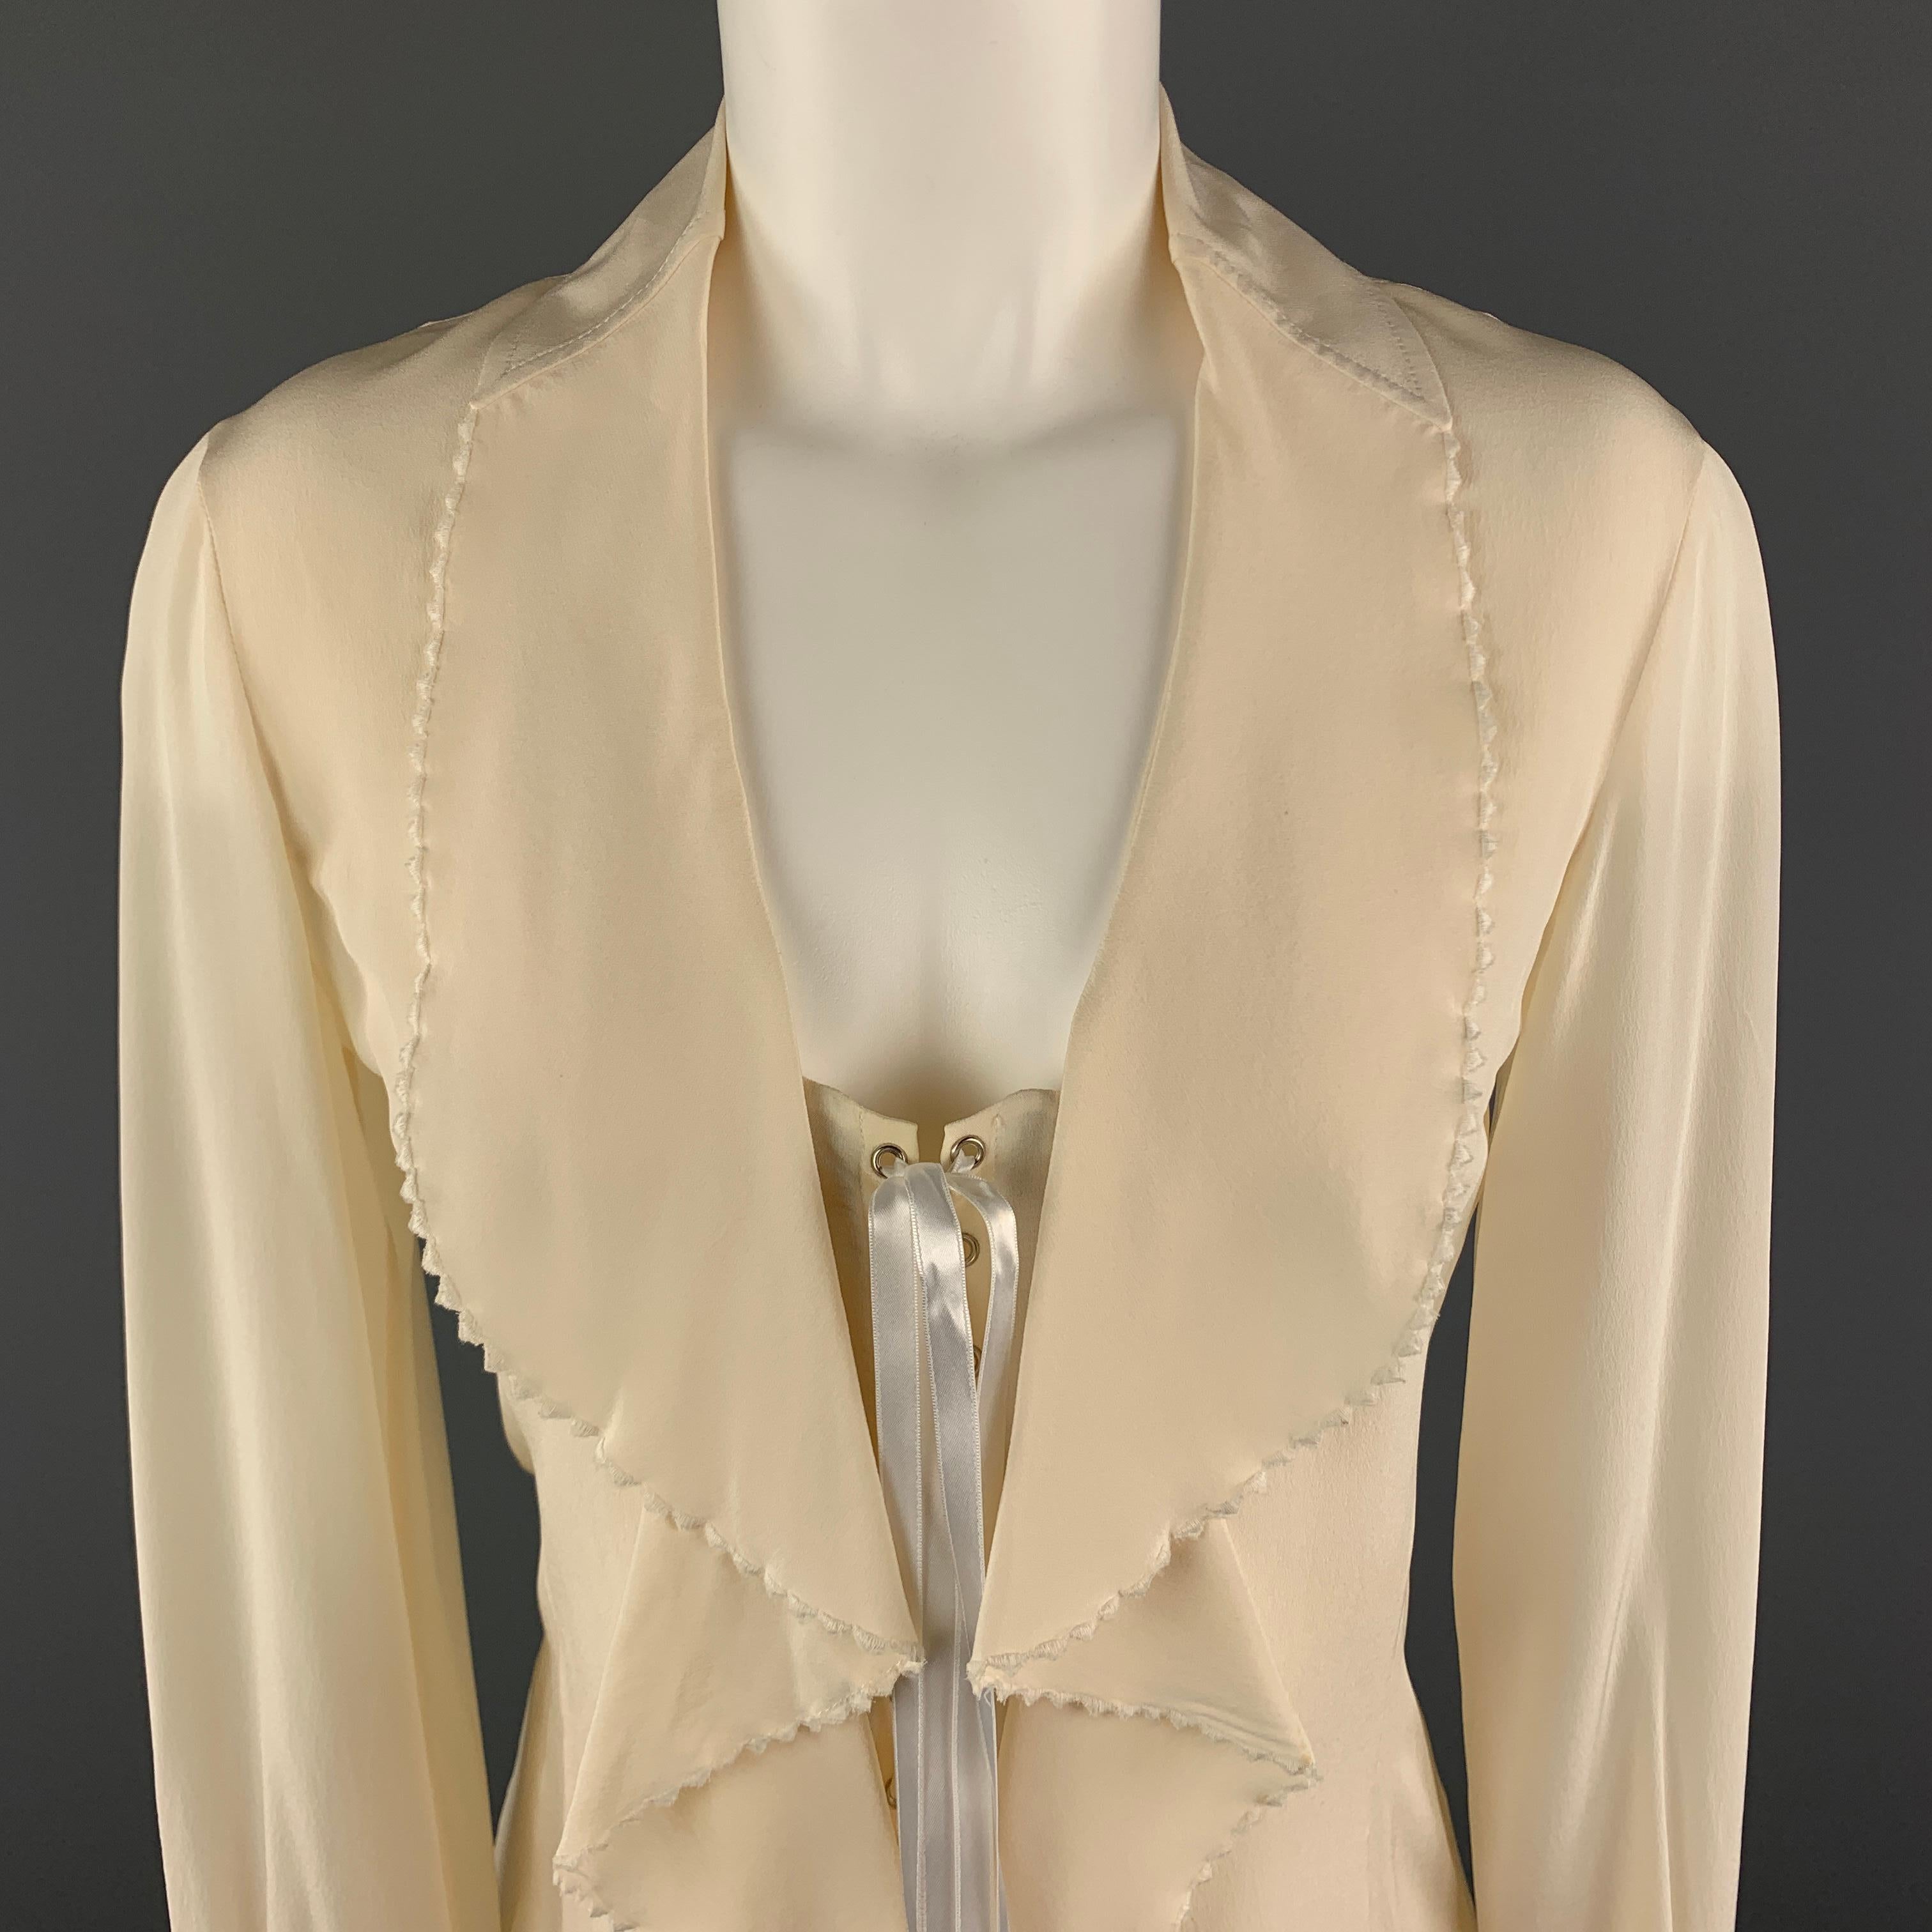 GIANFRANCO FERRE Blouse comes in a cream tone in a silk material, with a ruffled collar and front, a corset effect, long sleeves, buttoned cuffs, a side zipper, and a silver tone metal hardware. Small spots at front. Made in Italy.

Very Good